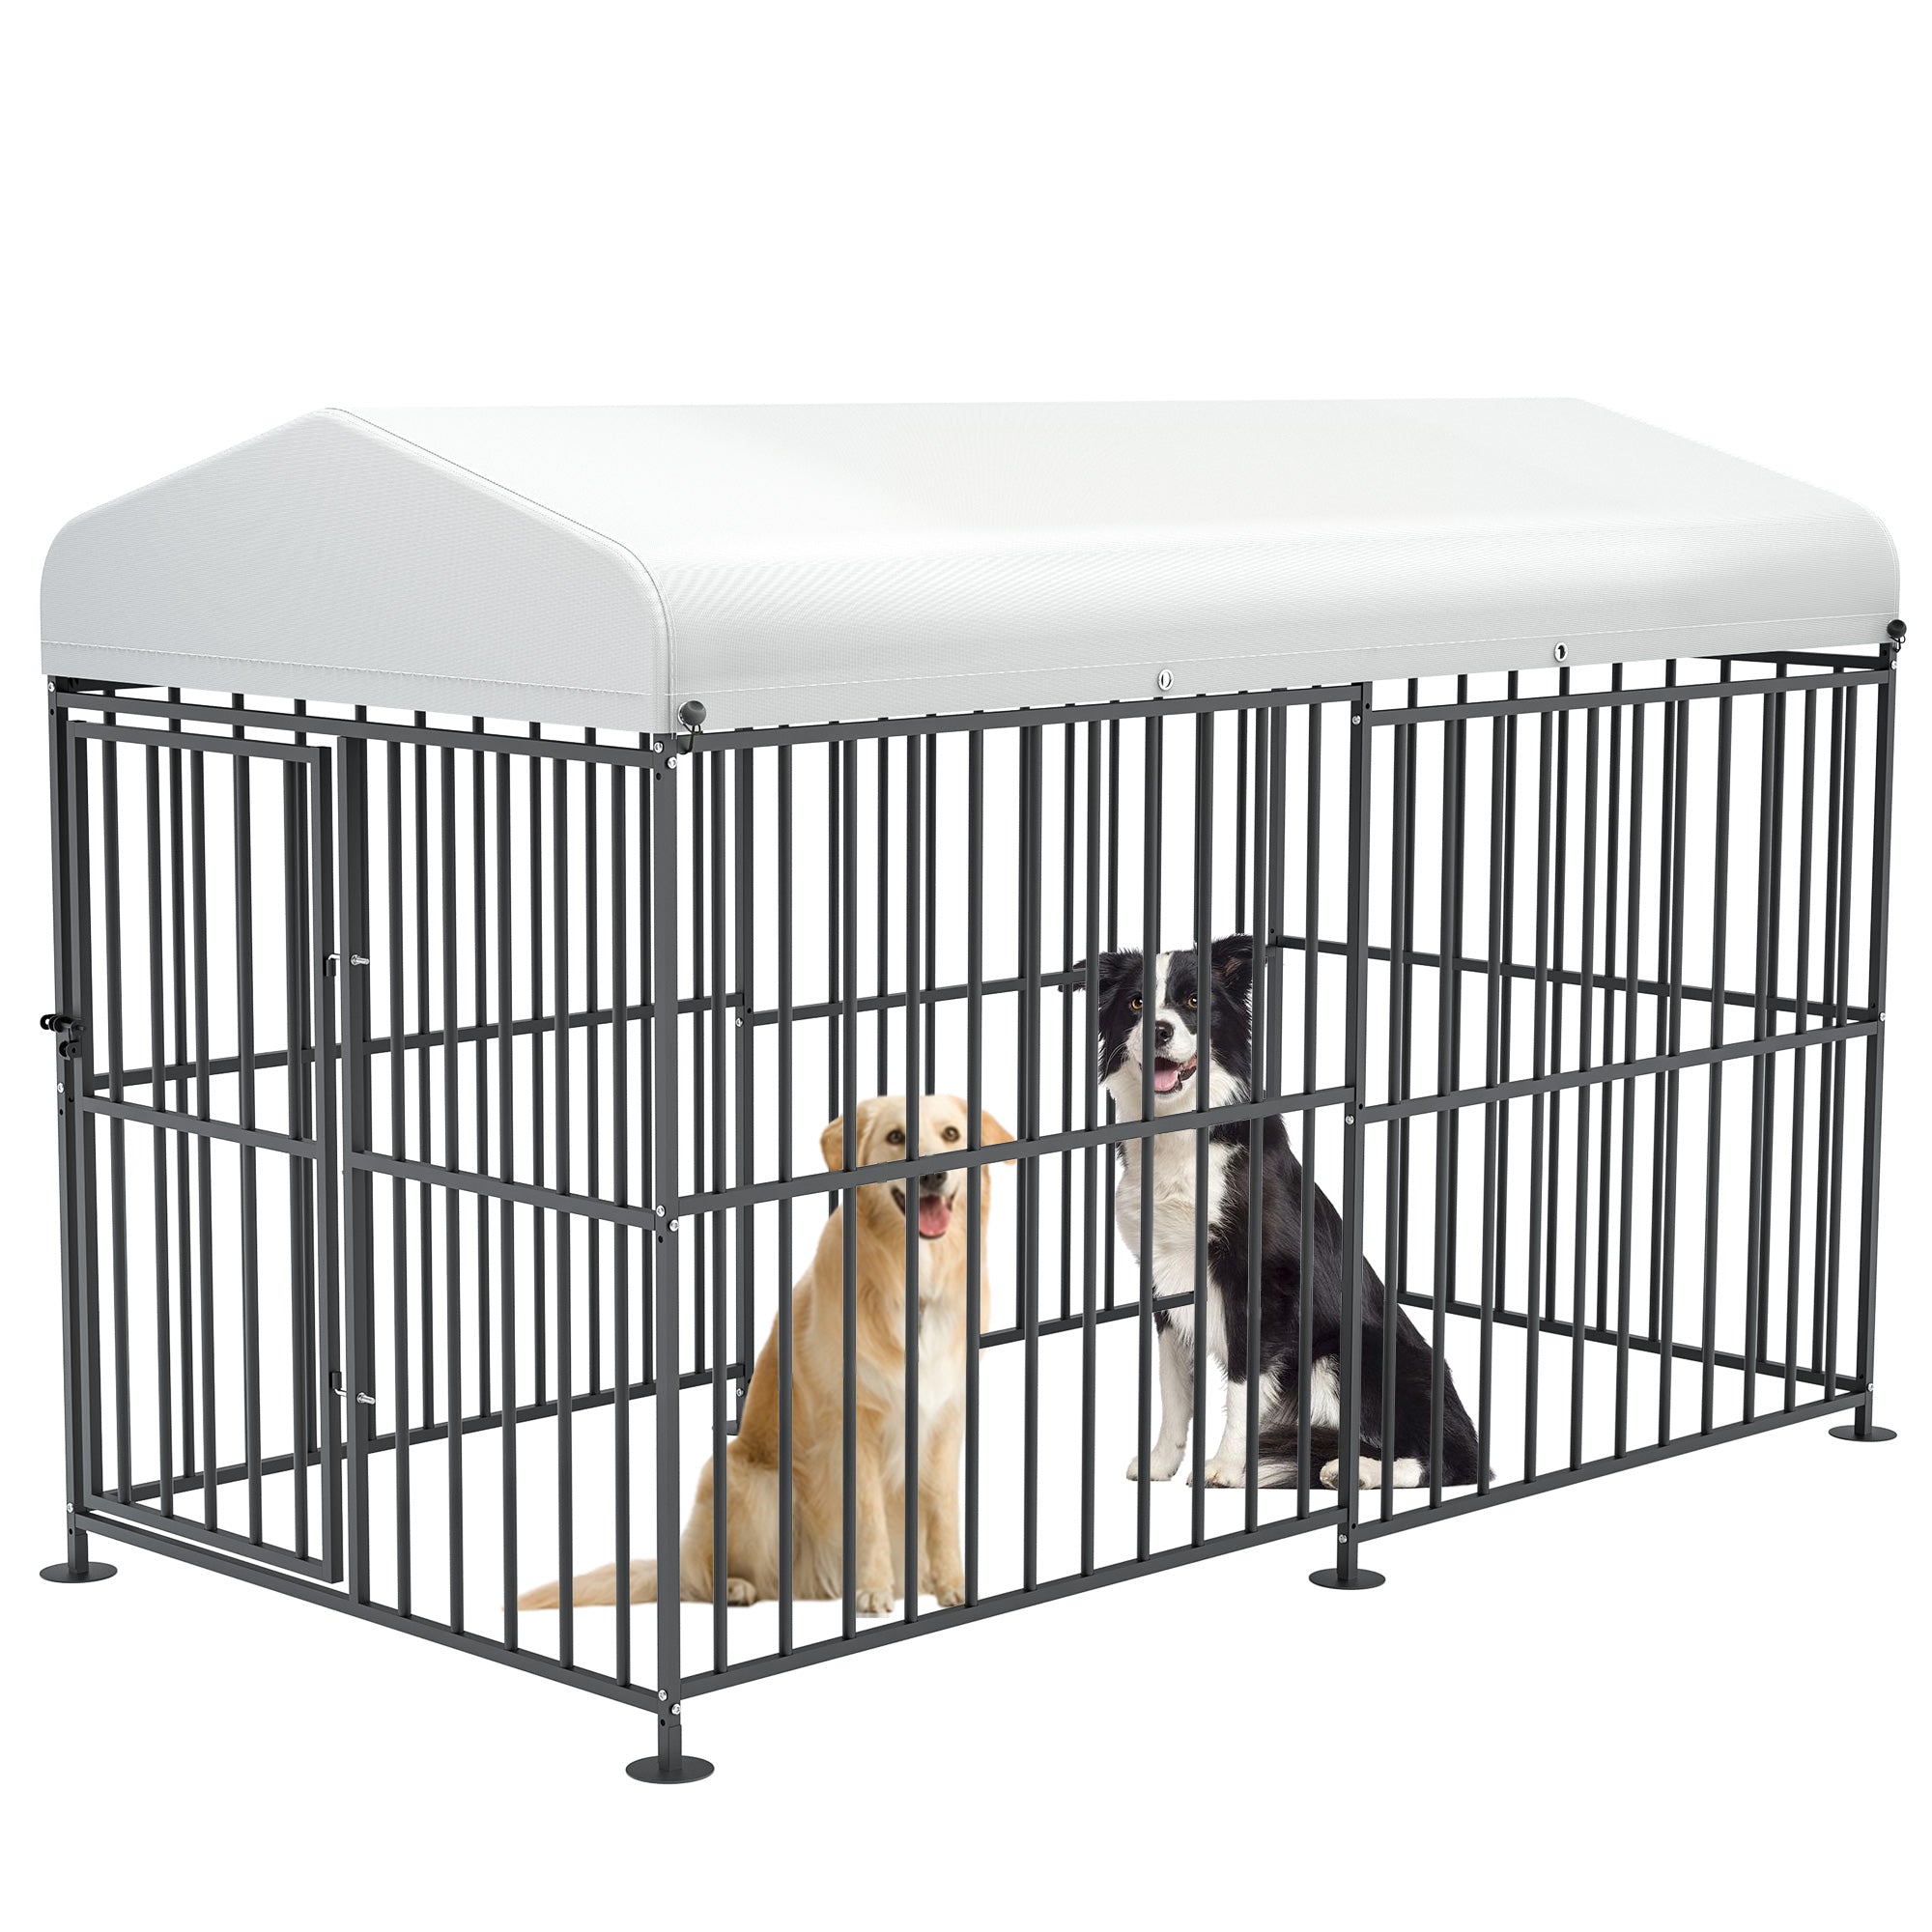 BEIMO Dog Kennel Outdoor for Large Medium Dogs Extra Heavy Duty